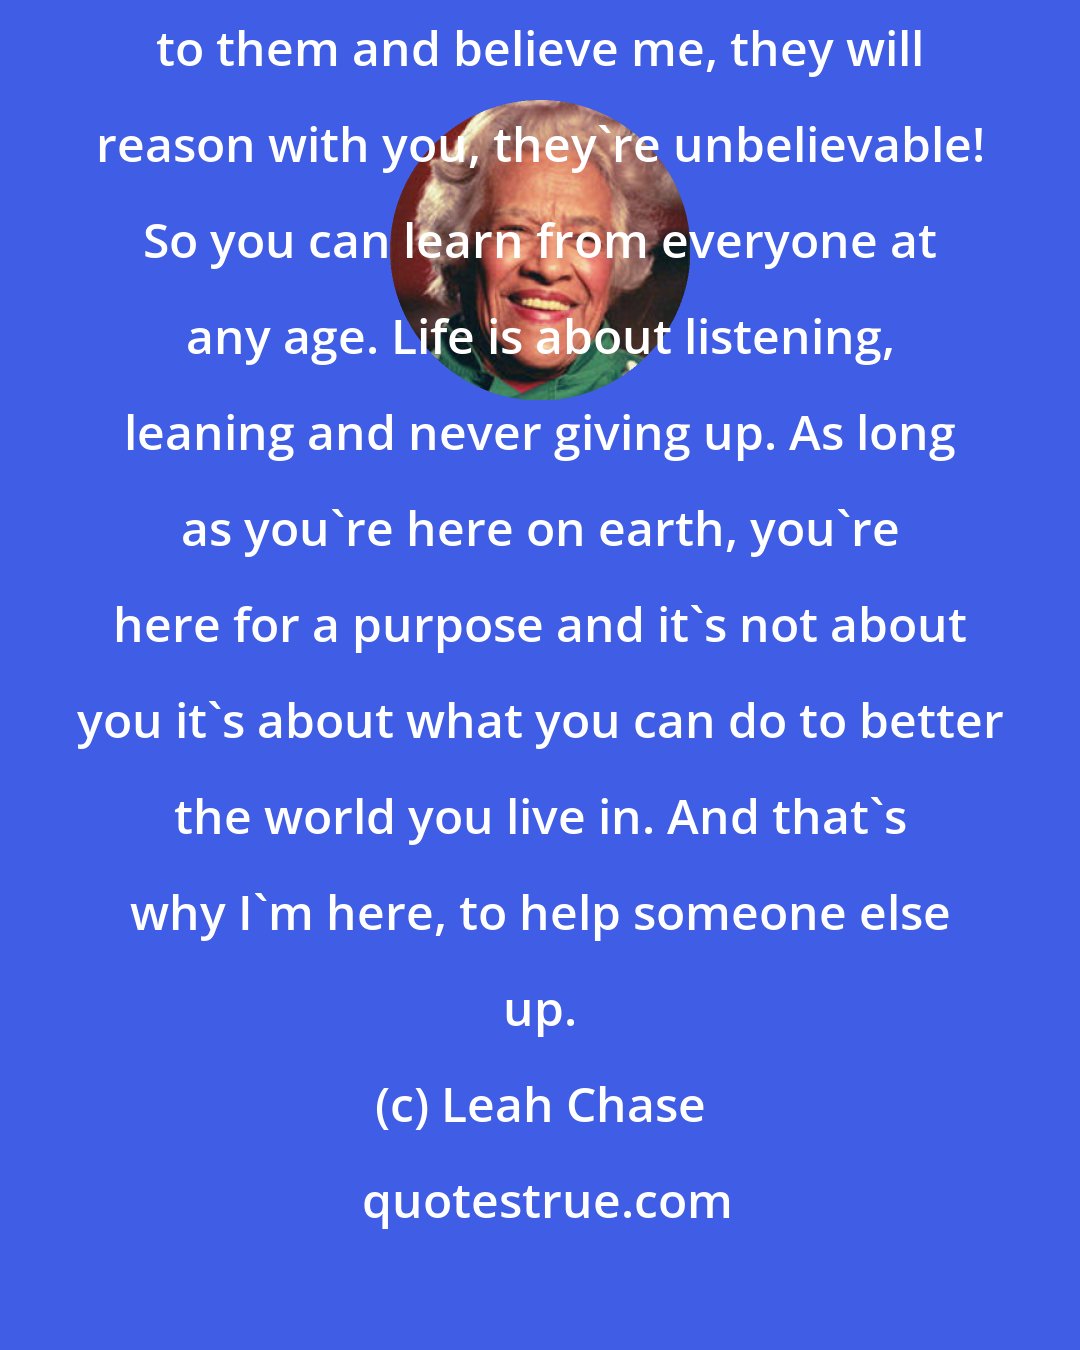 Leah Chase: You have to explain to little children 'why' and you also have to listen to them and believe me, they will reason with you, they're unbelievable! So you can learn from everyone at any age. Life is about listening, leaning and never giving up. As long as you're here on earth, you're here for a purpose and it's not about you it's about what you can do to better the world you live in. And that's why I'm here, to help someone else up.